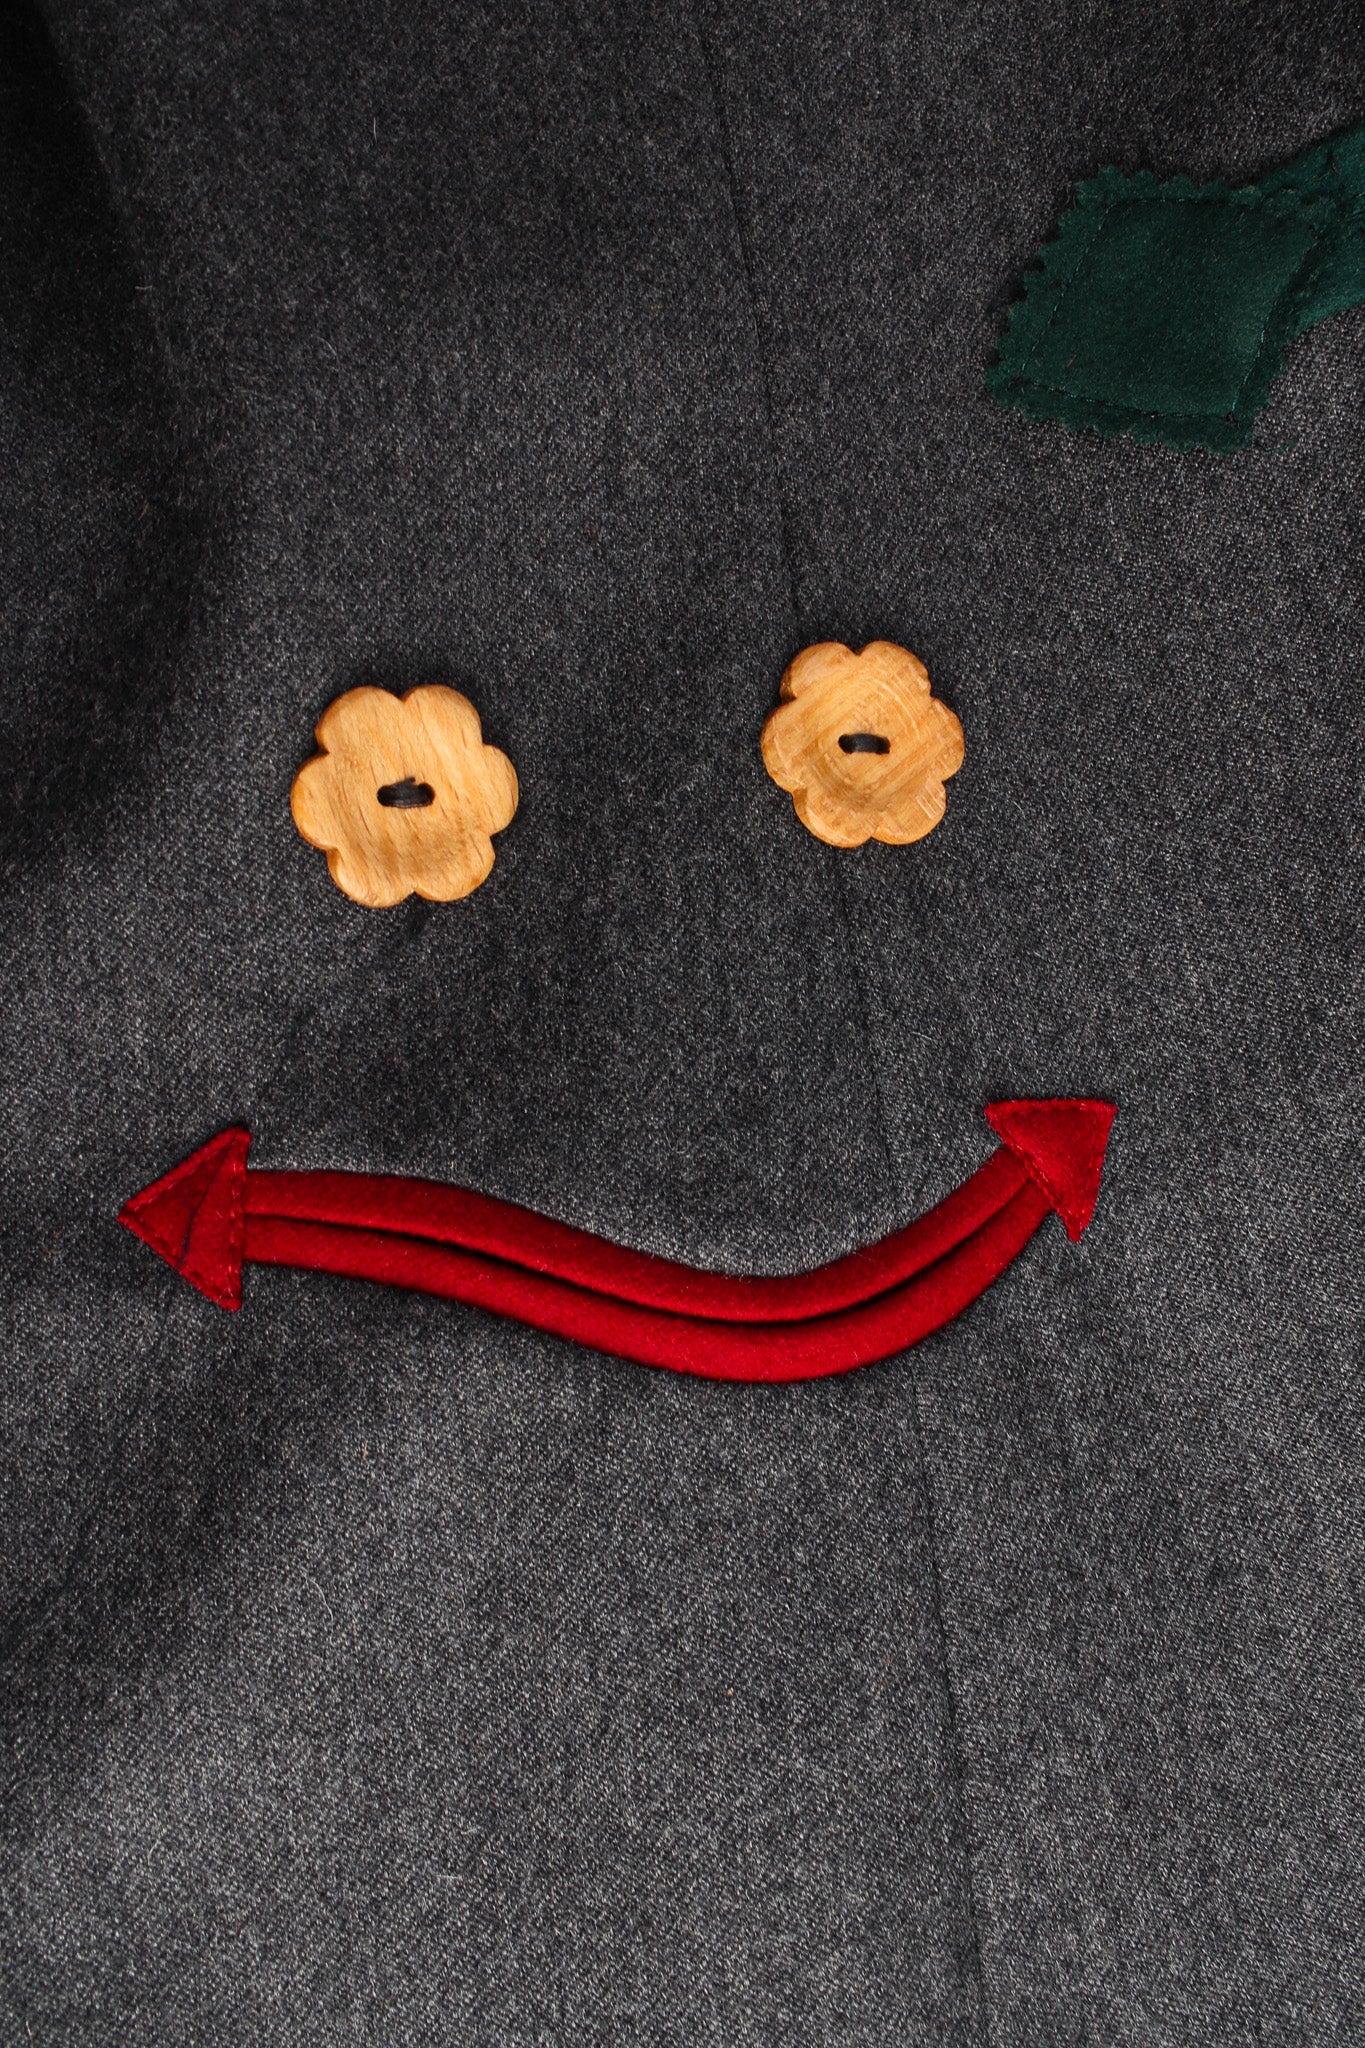 Vintage Moschino Face Expressions Acorn Wool Jacket smiley face @ Recess LA